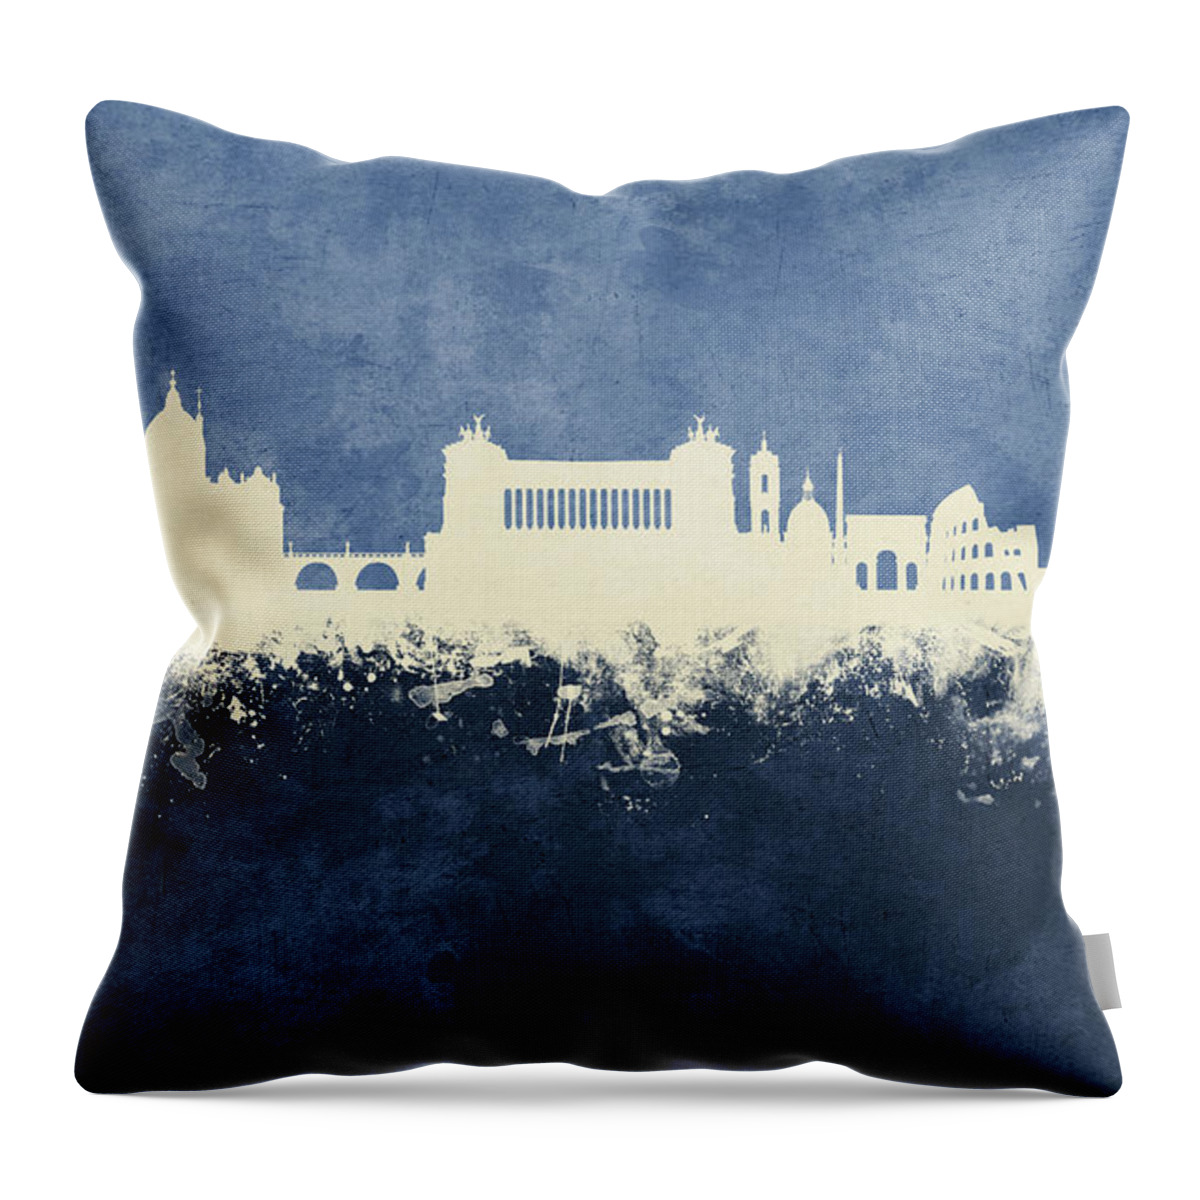 Rome Throw Pillow featuring the digital art Rome Italy Skyline by Michael Tompsett